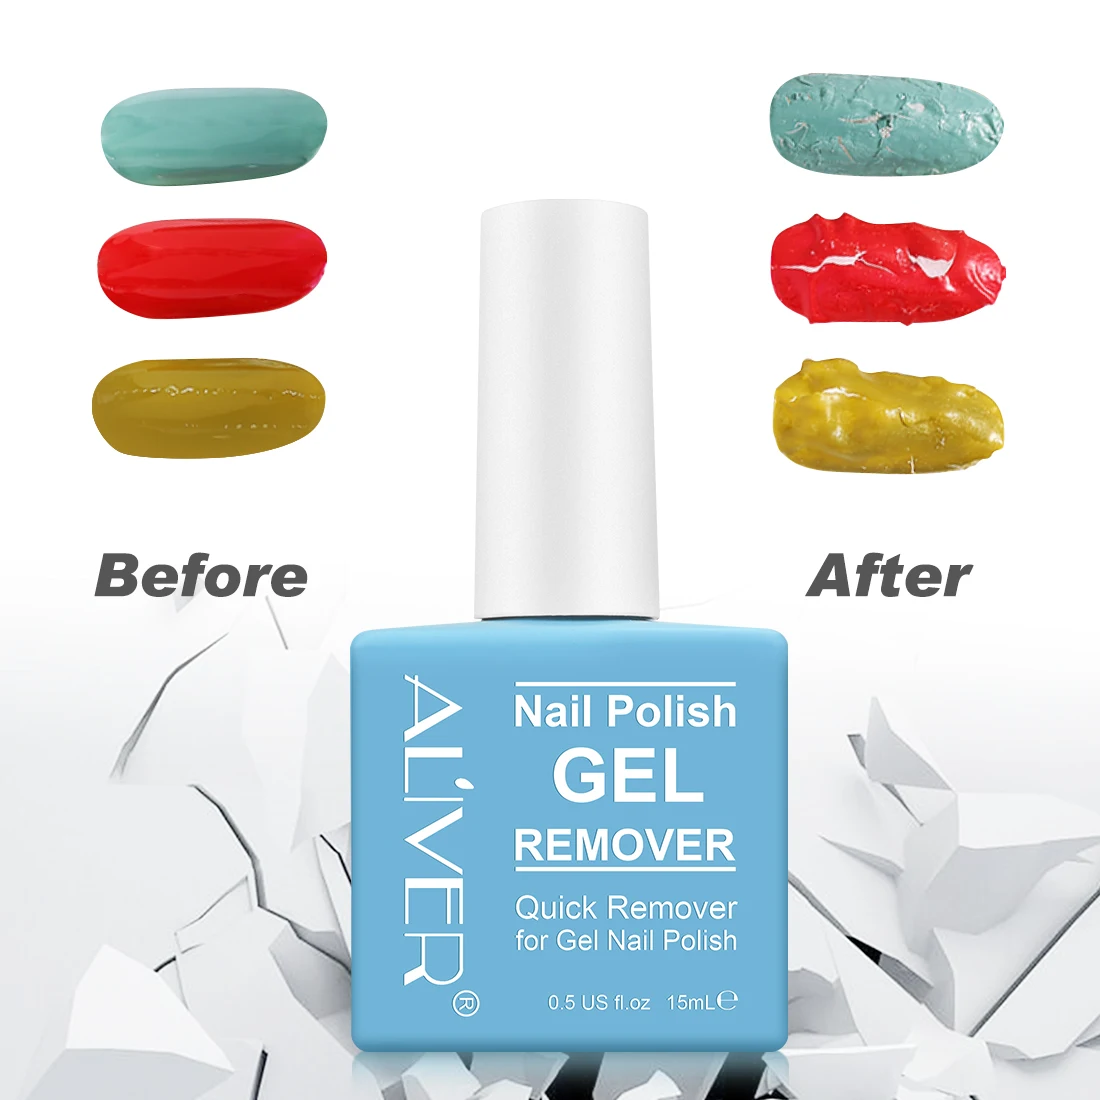 
Magic nail polish remover that quickly and easily removes nail gel in 3-5 minutes 